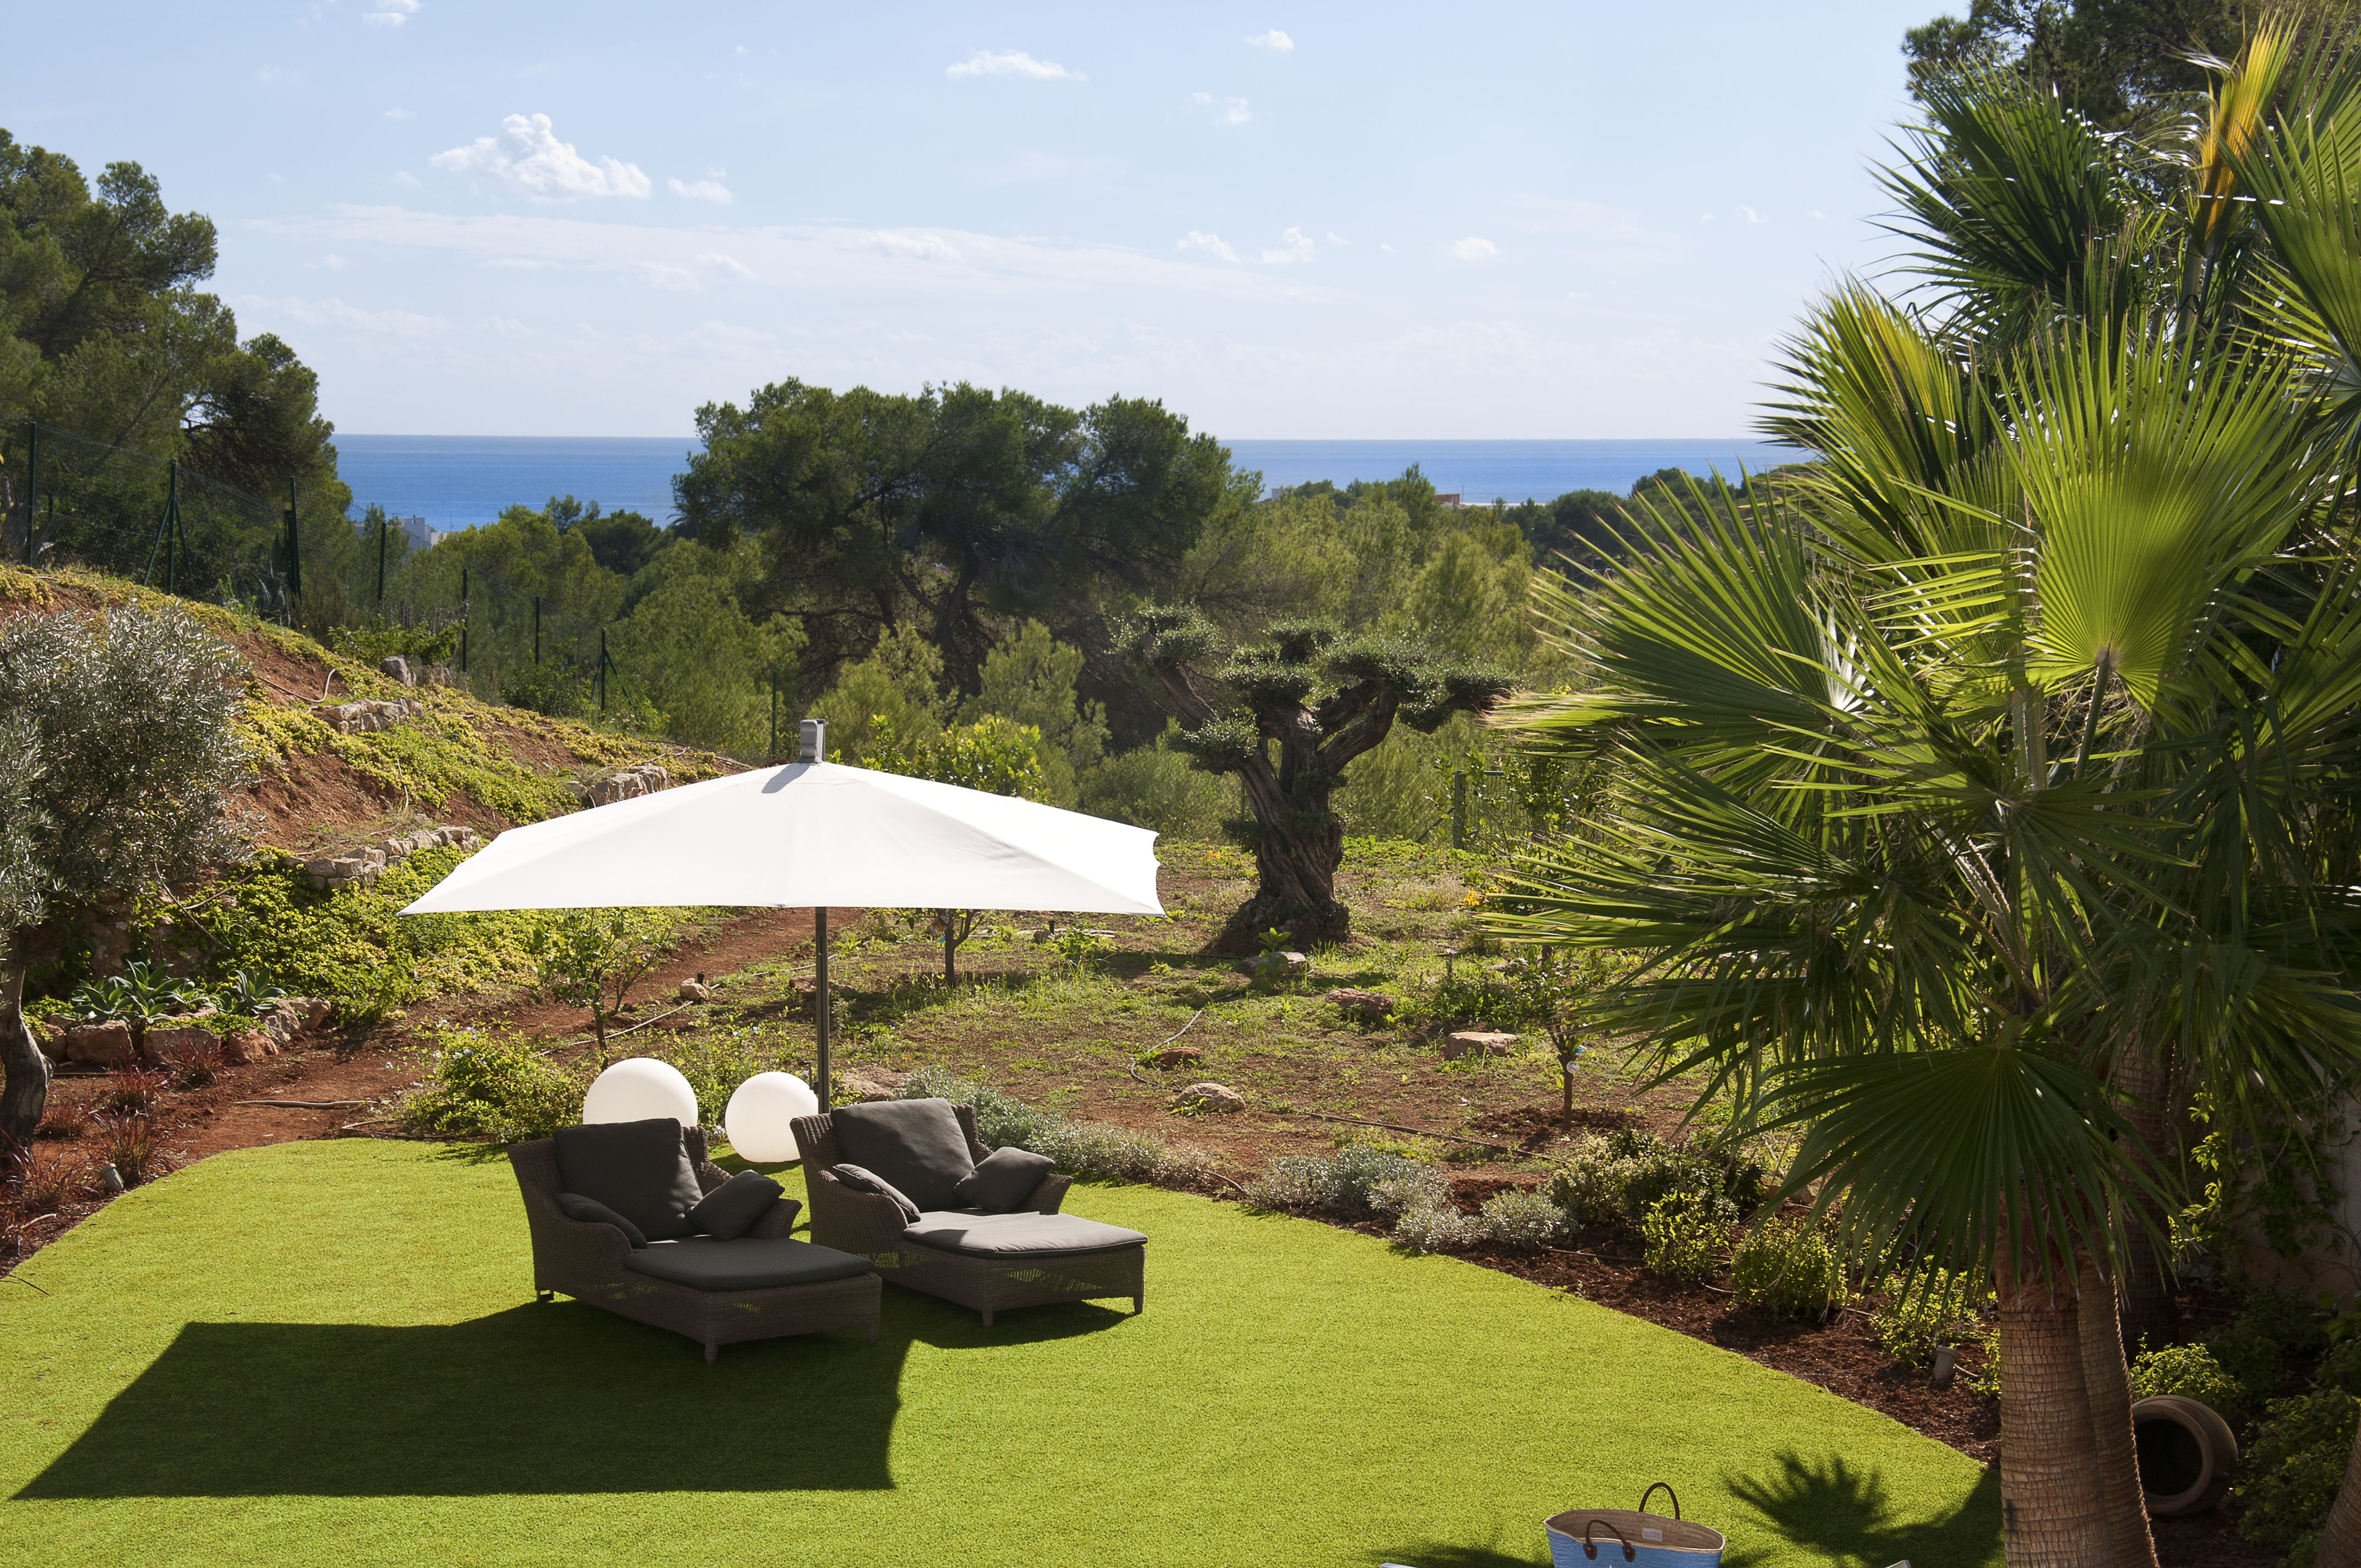 Unforgettable holidays in Ibiza with Engel & Völkers: Rent exquisite villas at up to 30% off